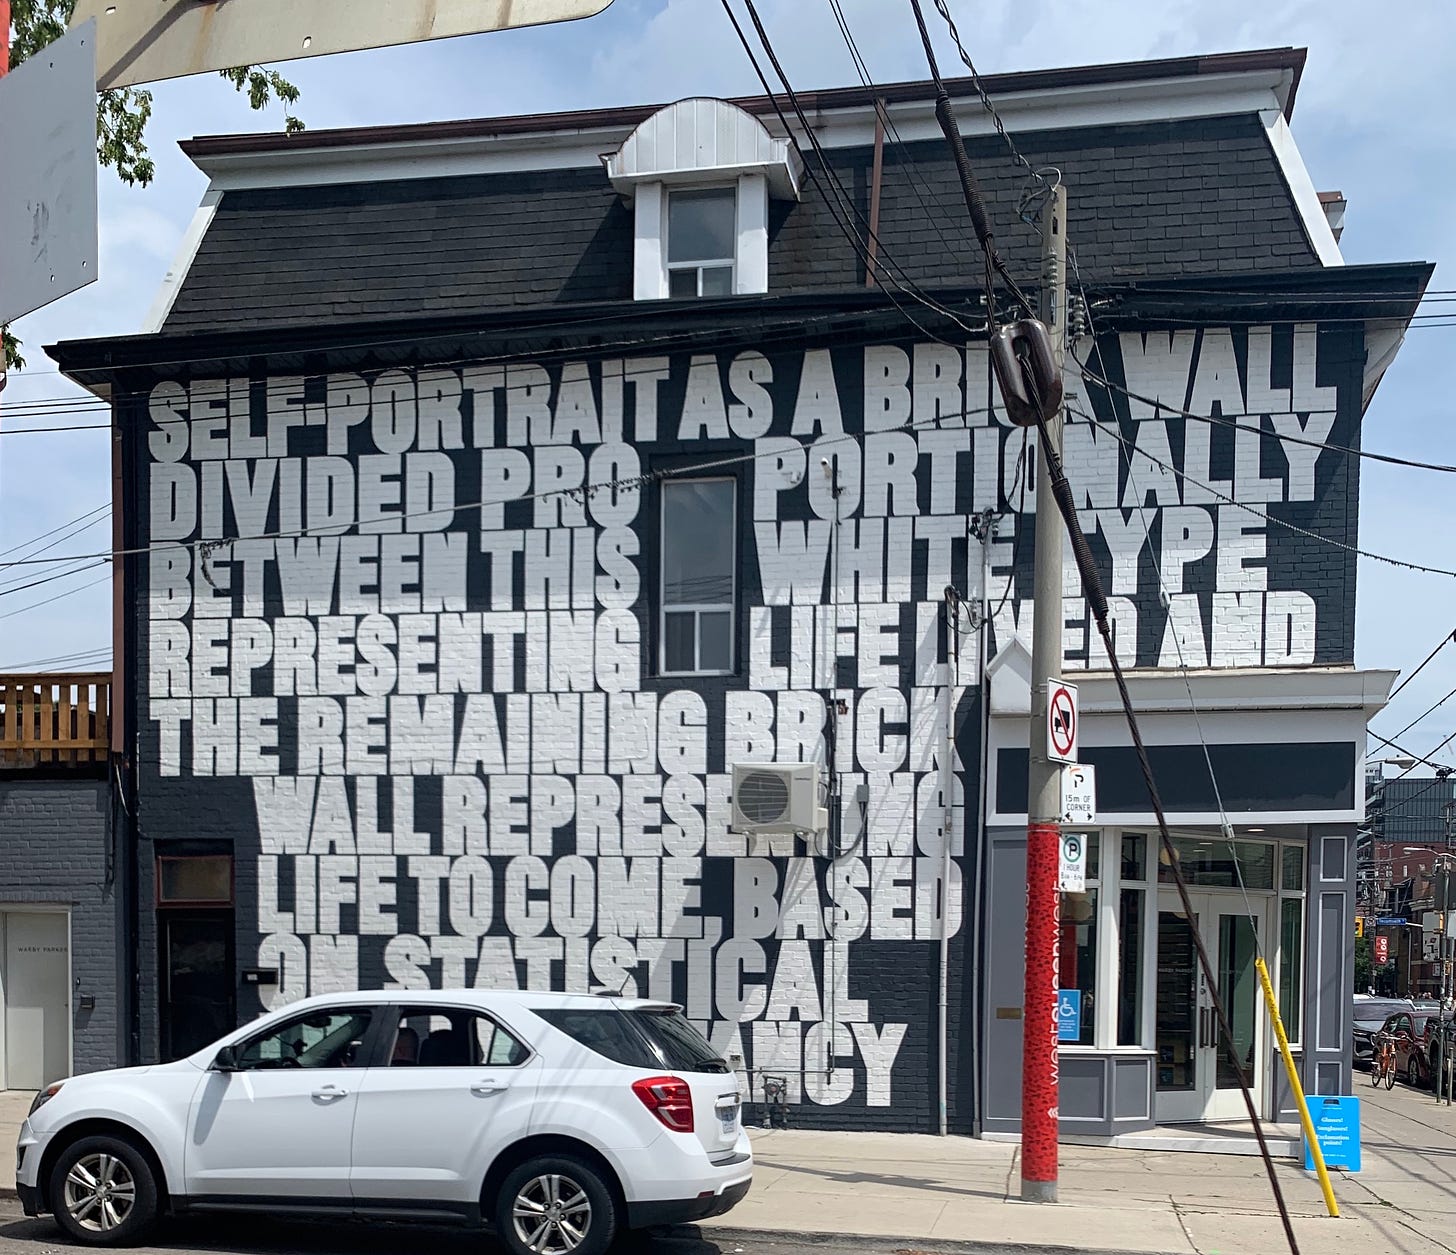 A building painted dark grey with white block text that covers an entire wall.